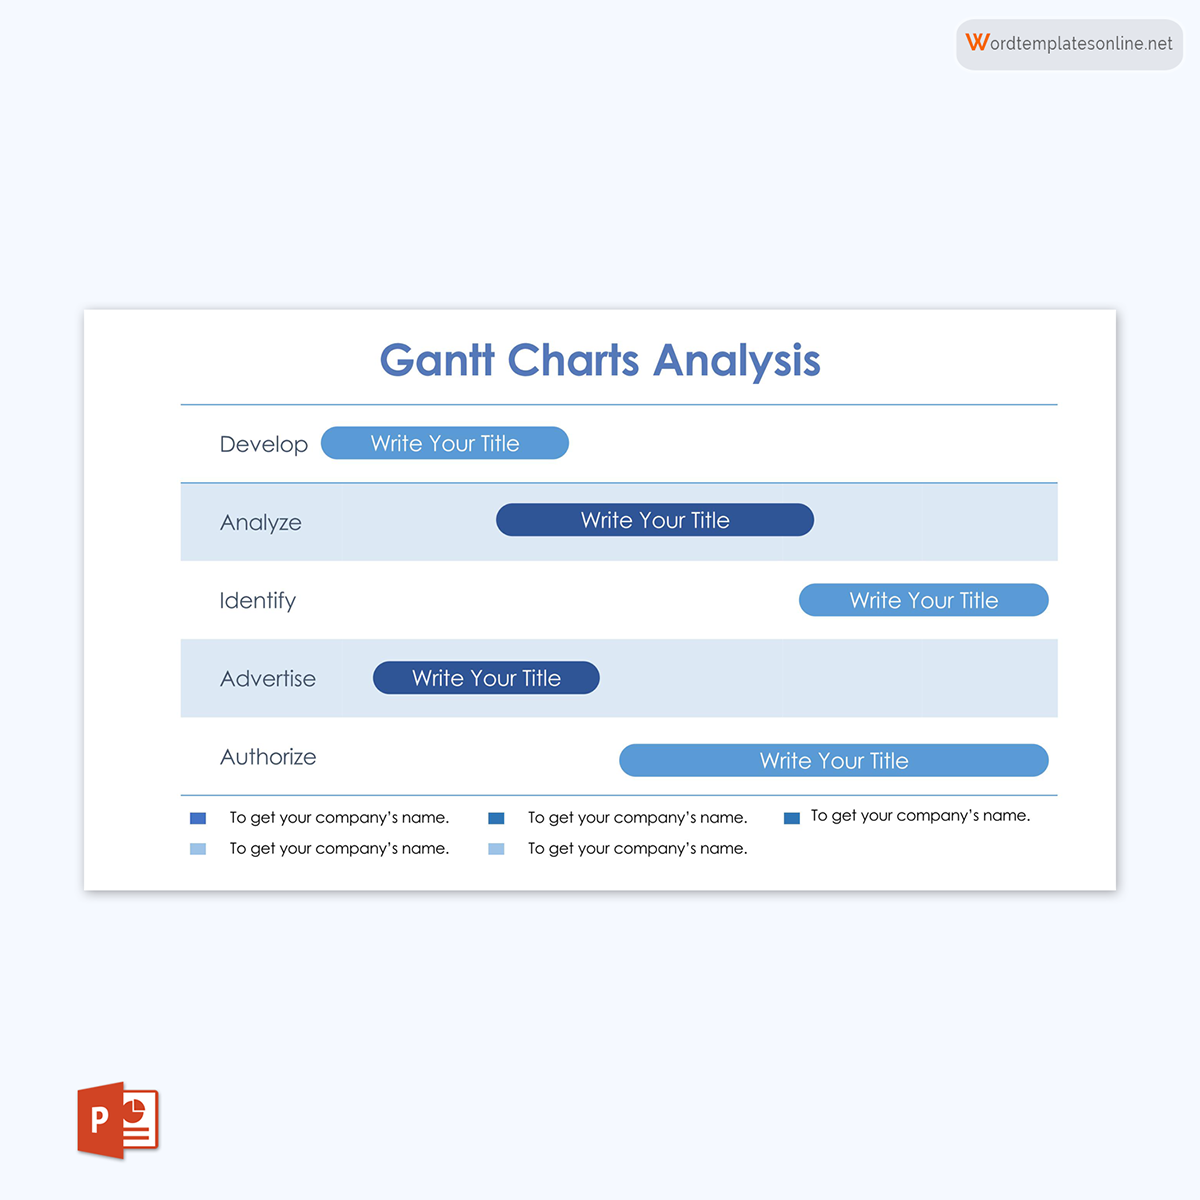 Professional Editable Title Based Gantt Chart Analysis Template 01 as PowerPoint Slides